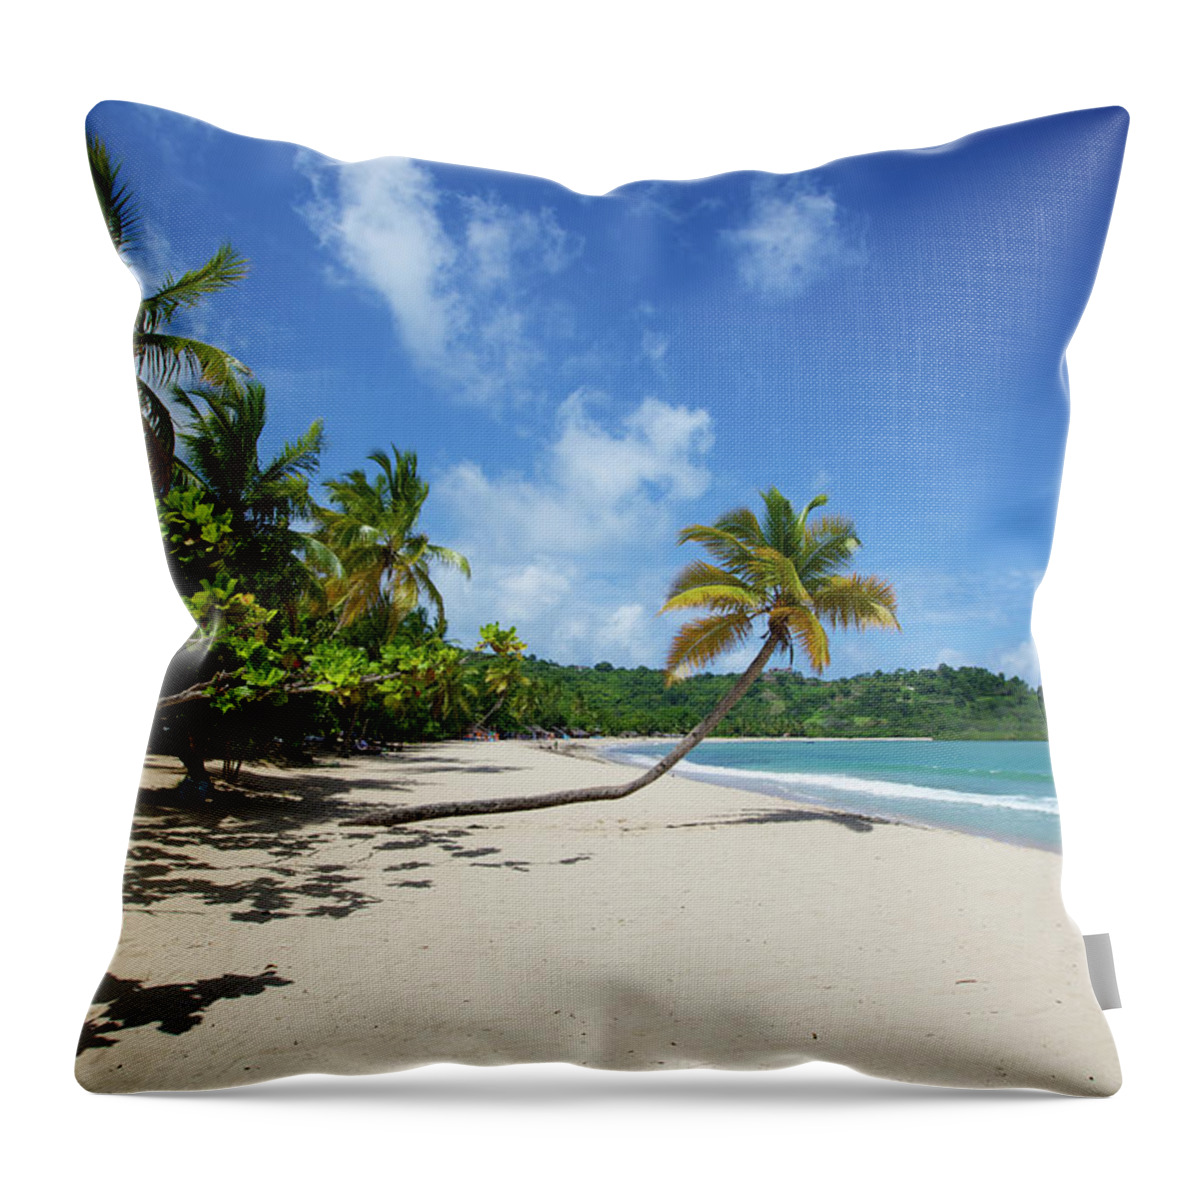 Tranquility Throw Pillow featuring the photograph Palm Trees At Andilana Beach by Gergely Antal - Pgaalien@gmail.com